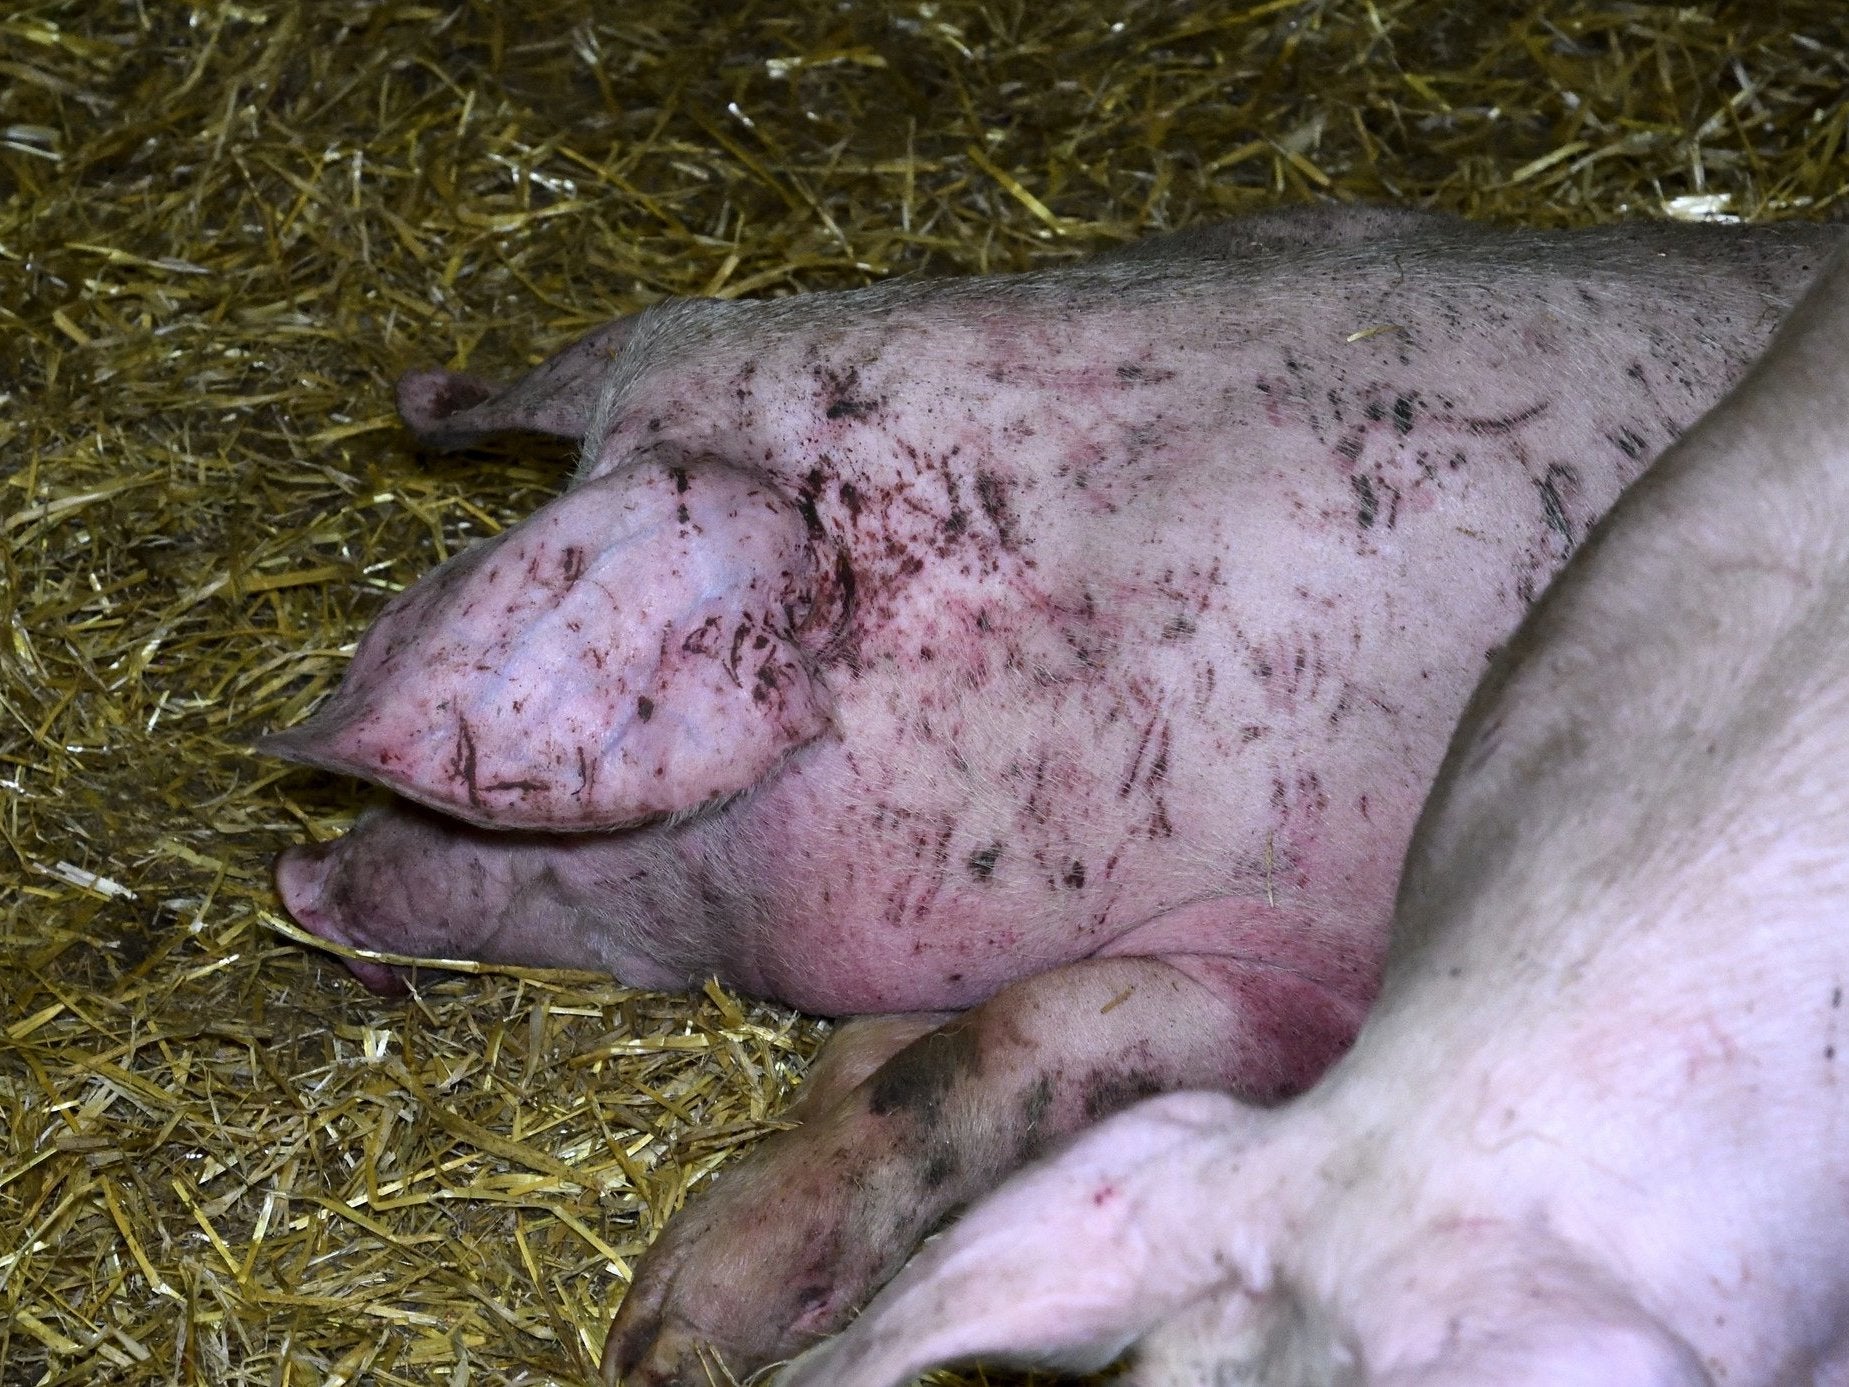 A scarred and bruised pig at Fir Tree Farm in Goxhill, Lincolnshire